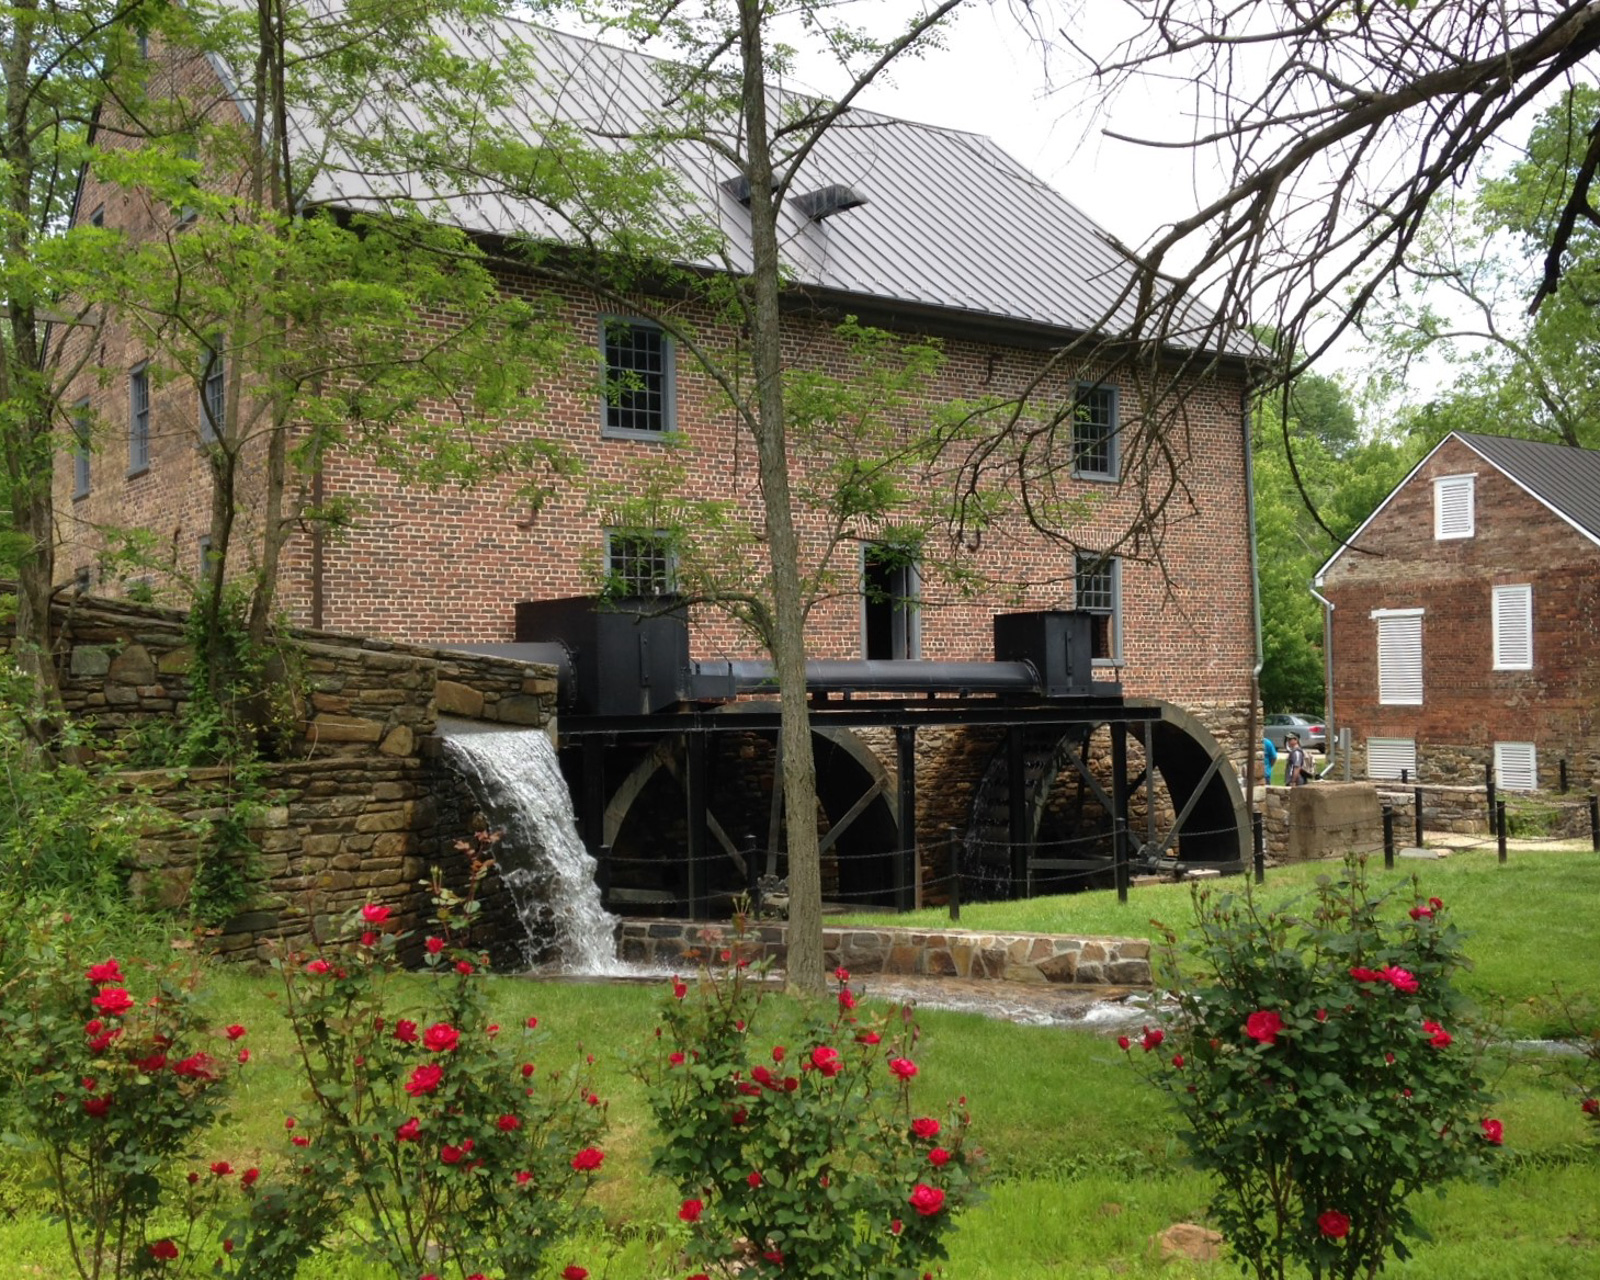 aldie mill historic area with its twin water wheels along side the historic brick building